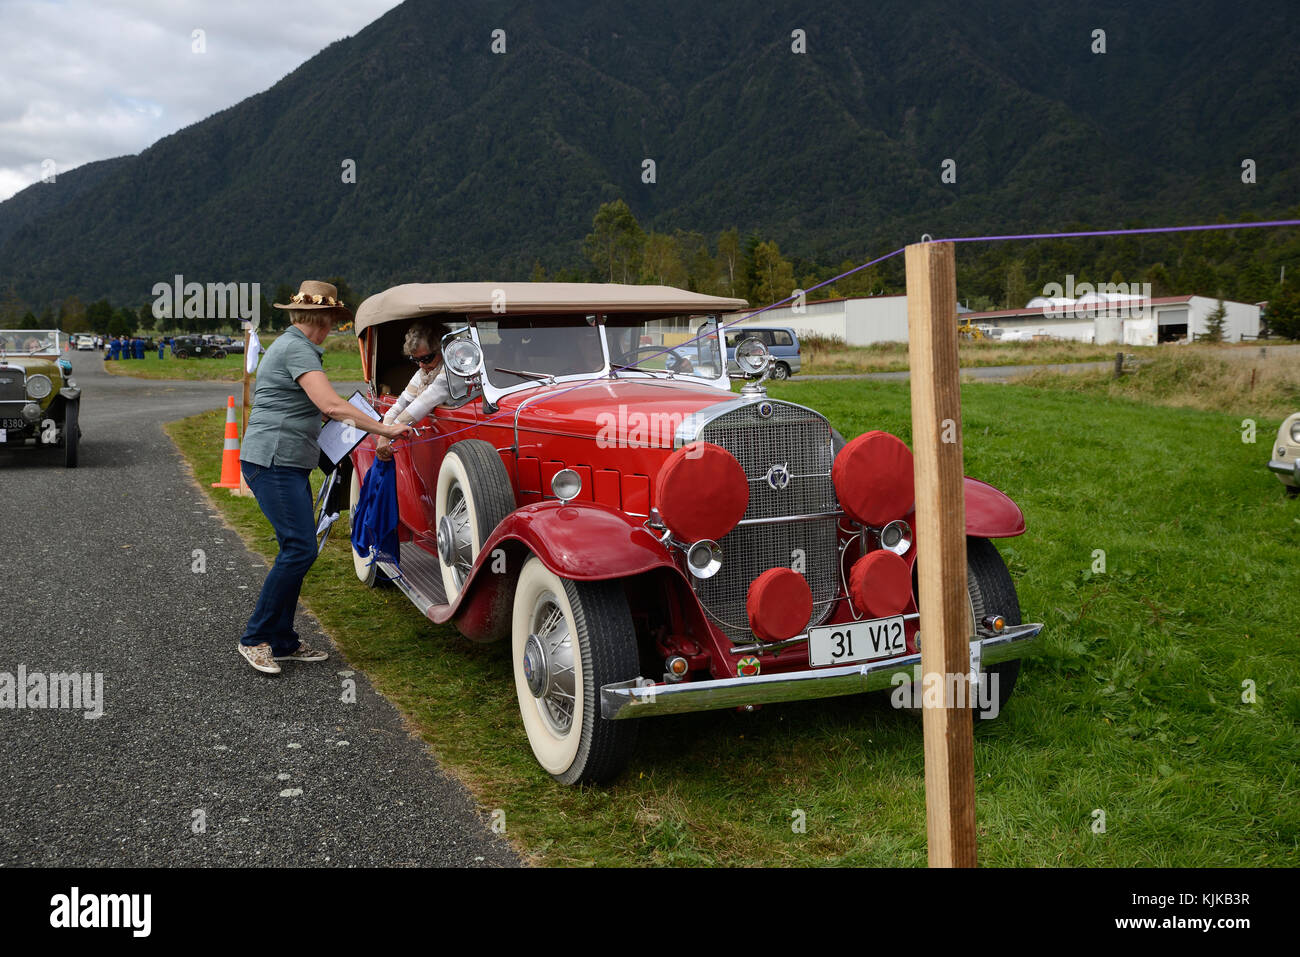 HAUPIRI, NEW ZEALAND, MARCH 18, 2017: Contestants in a vintage car rally hang out washing in a timed competition. The vehicle is a 1931 V12 Cadillac. Stock Photo